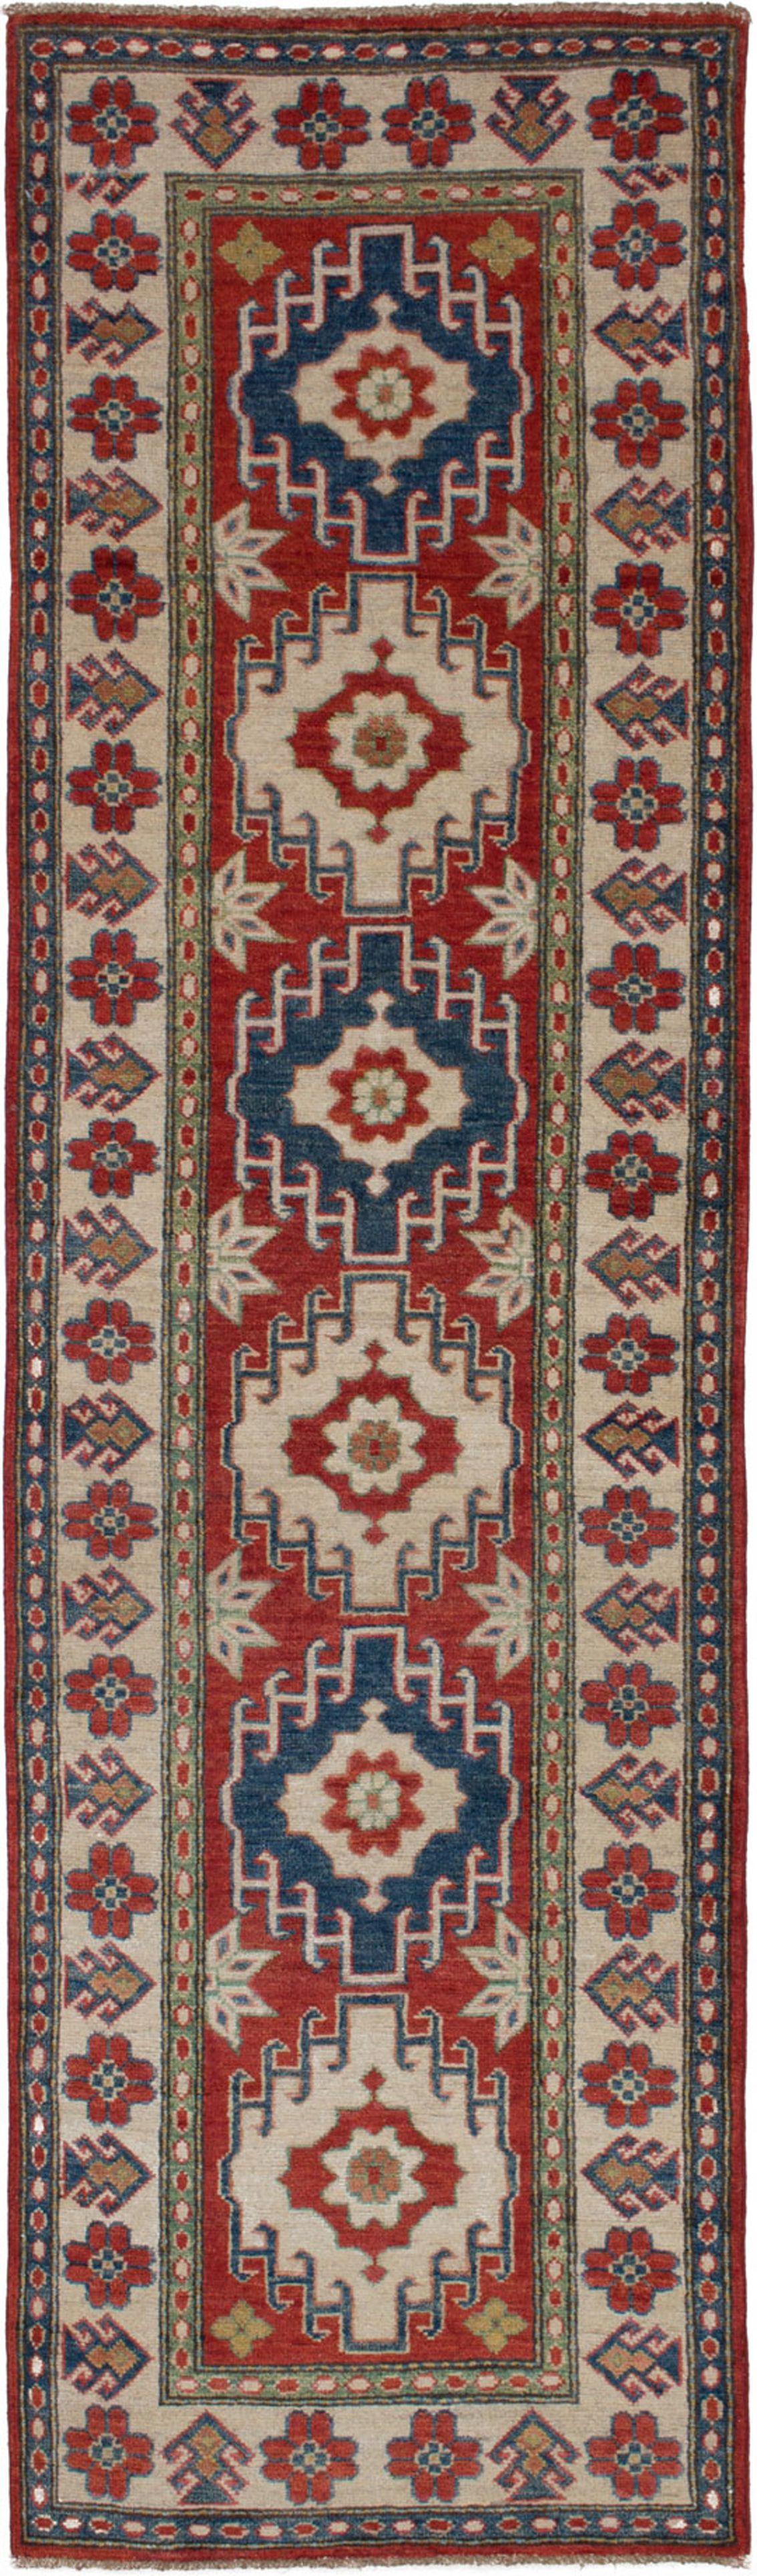 Hand-knotted Finest Gazni Red Wool Rug 2'8" x 9'5"  Size: 2'8" x 9'5"  